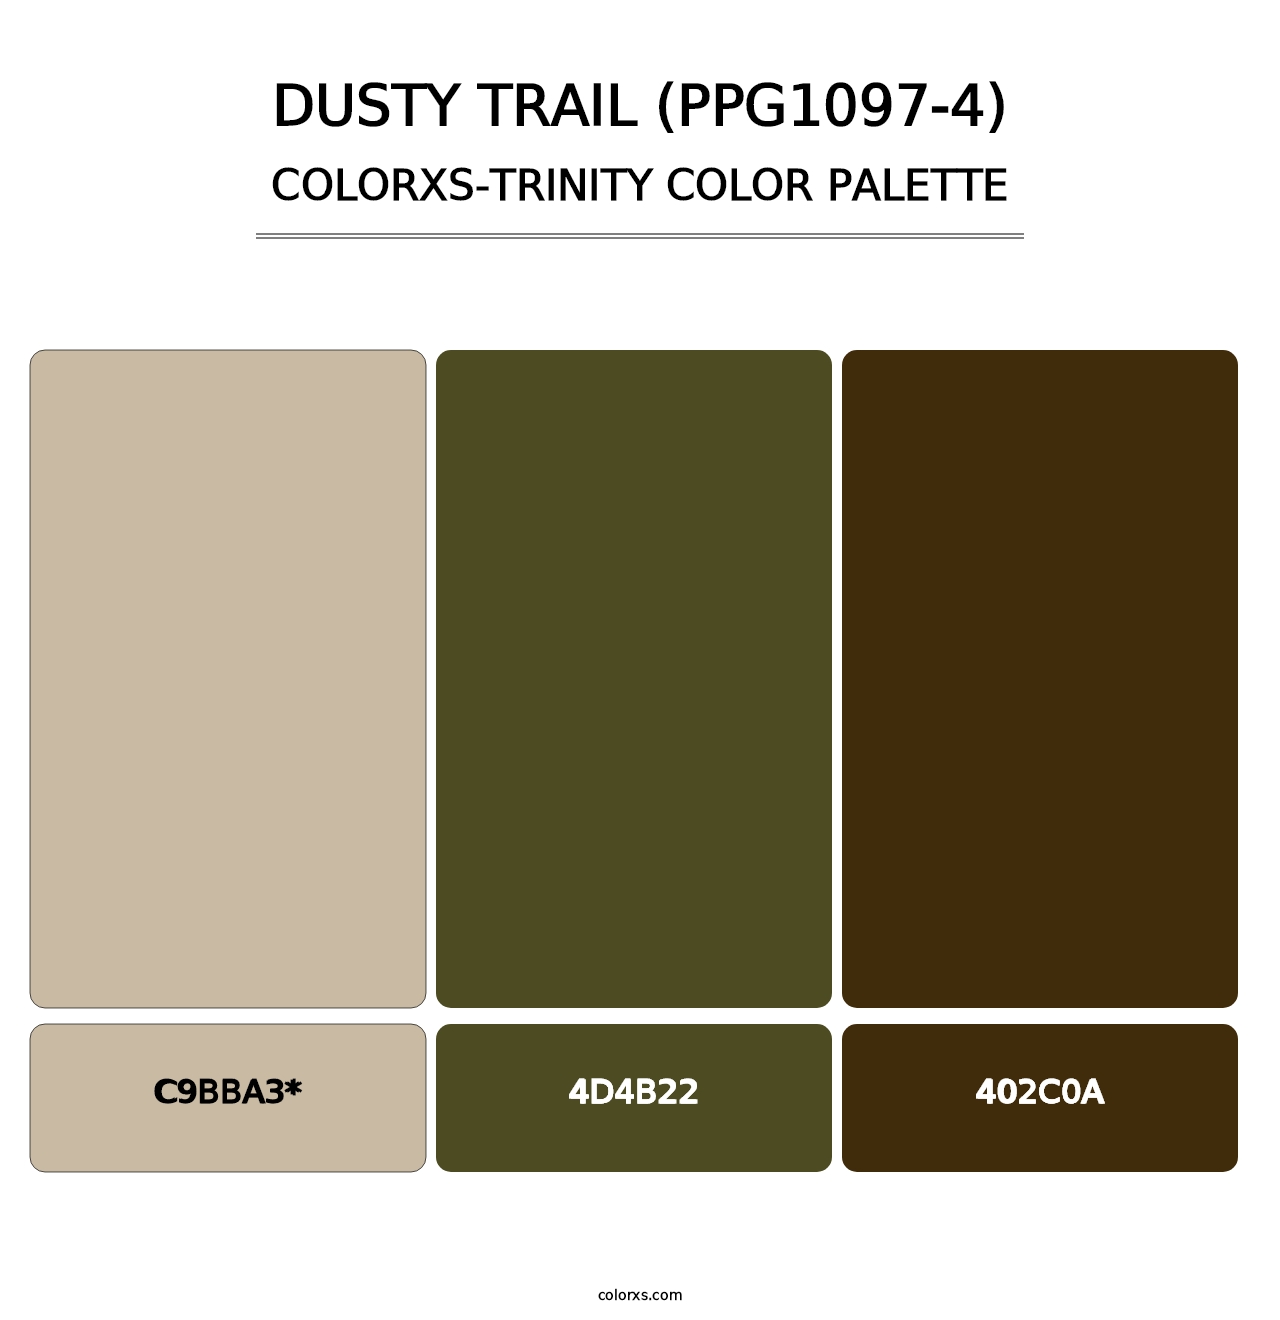 Dusty Trail (PPG1097-4) - Colorxs Trinity Palette